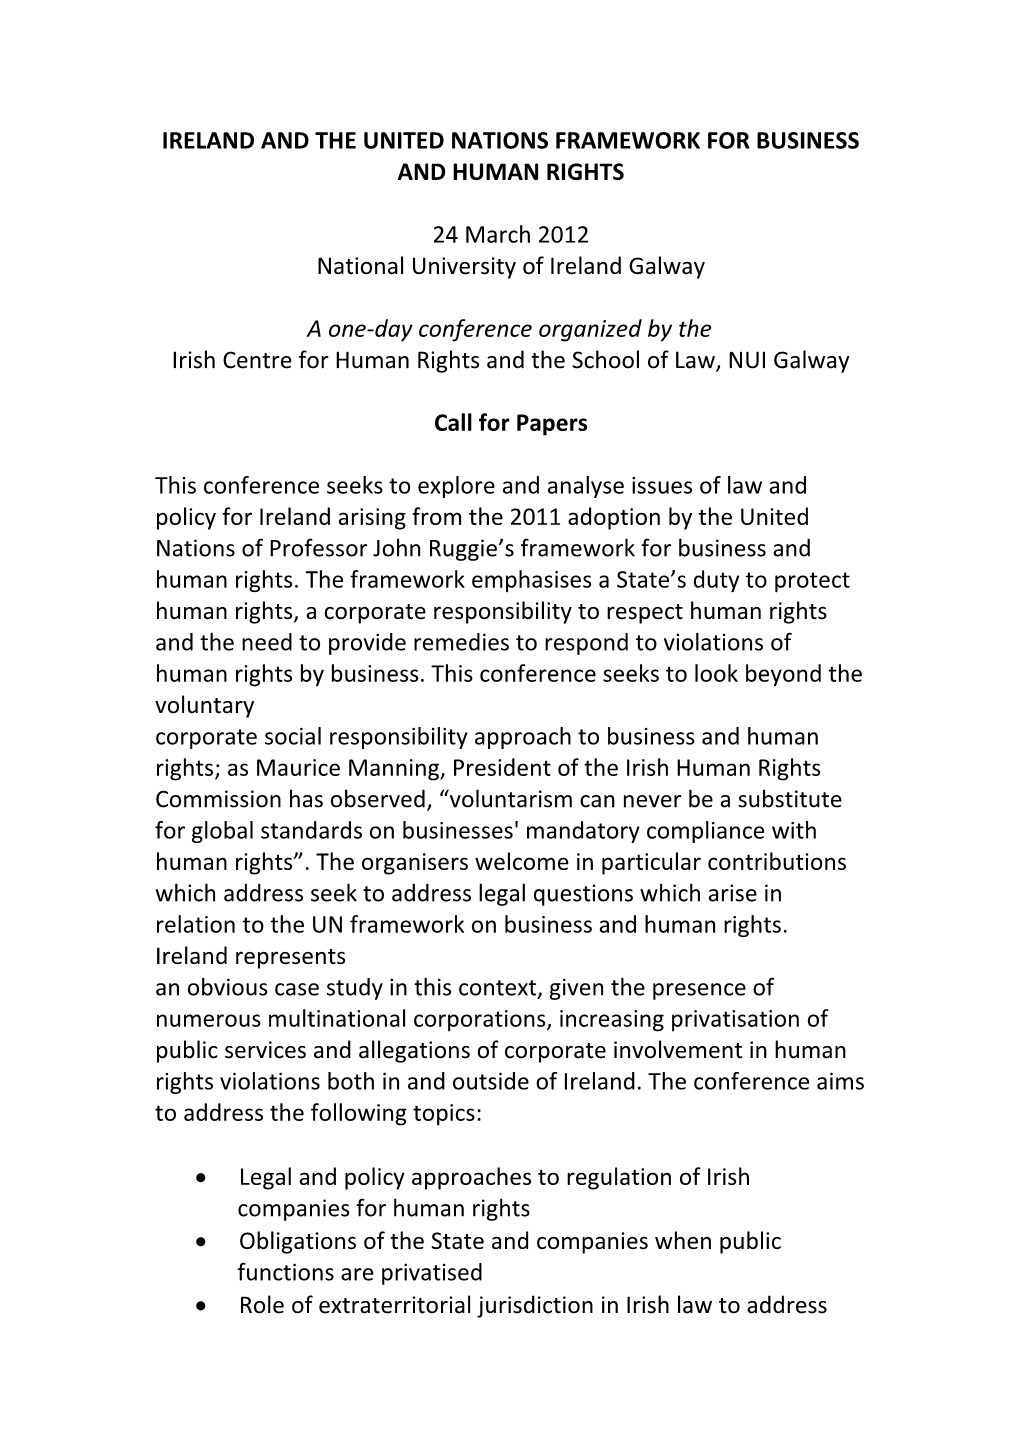 Ireland and the United Nations Framework for Business and Human Rights